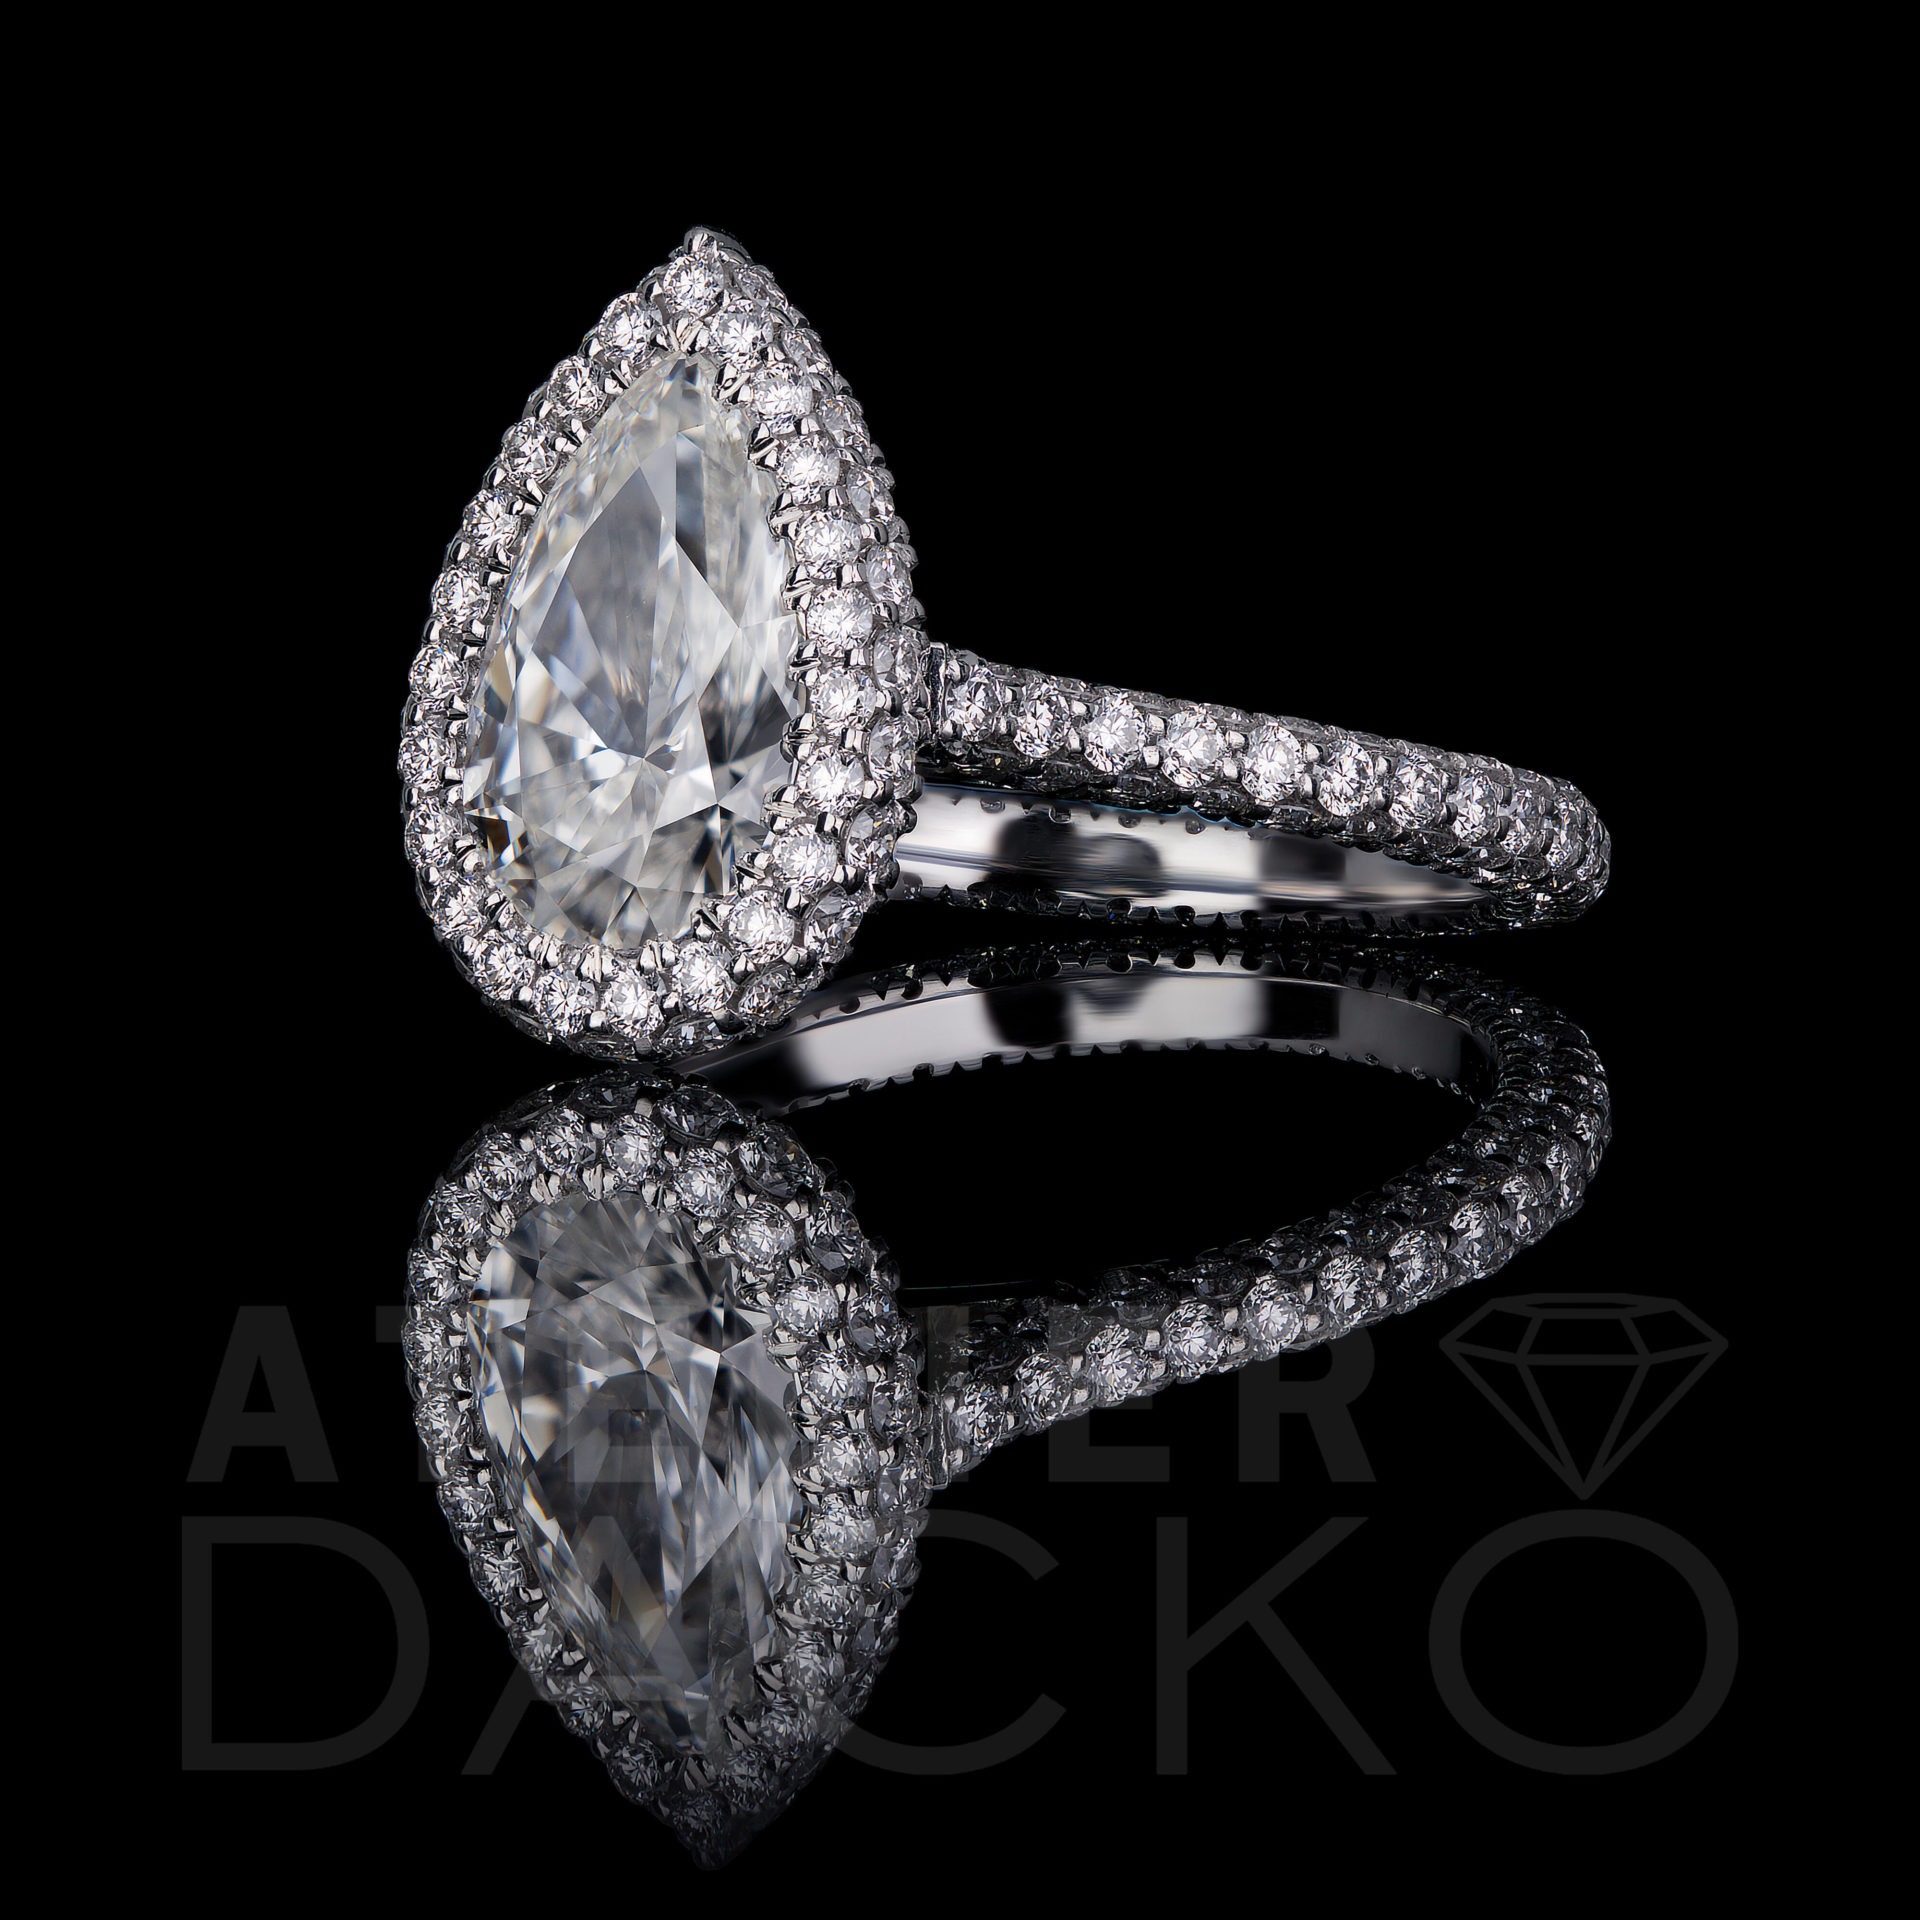 AD024 - 1.20 CT Pear Shaped Diamond Engagement Ring in Halo Setting - 2